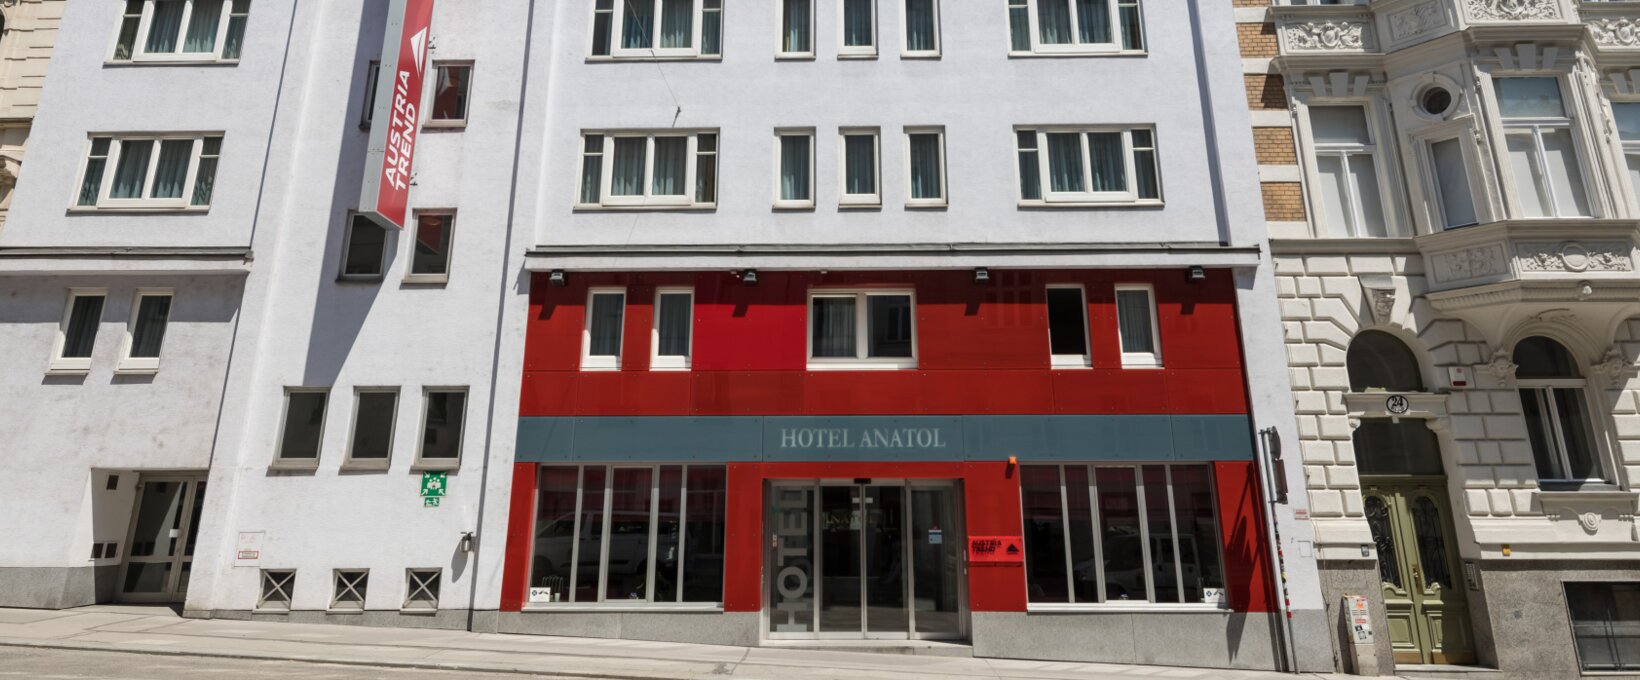 Exterior view hotel entrance | Hotel Anatol in Vienna